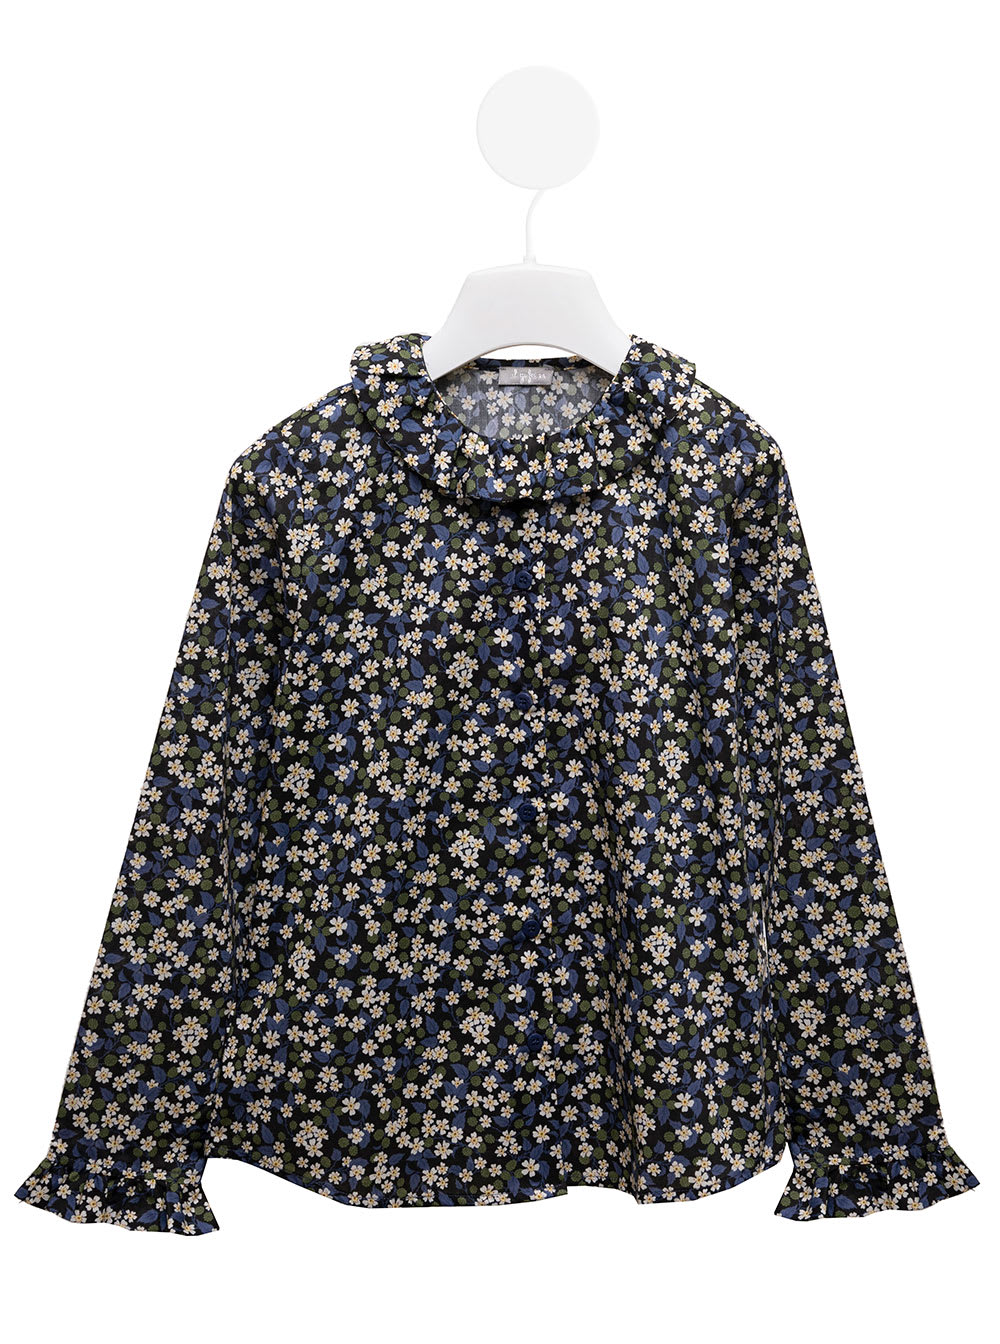 Il Gufo Black And Blue Floral Shirt In Cotton With Ruched Detail On Collar And Cuffs